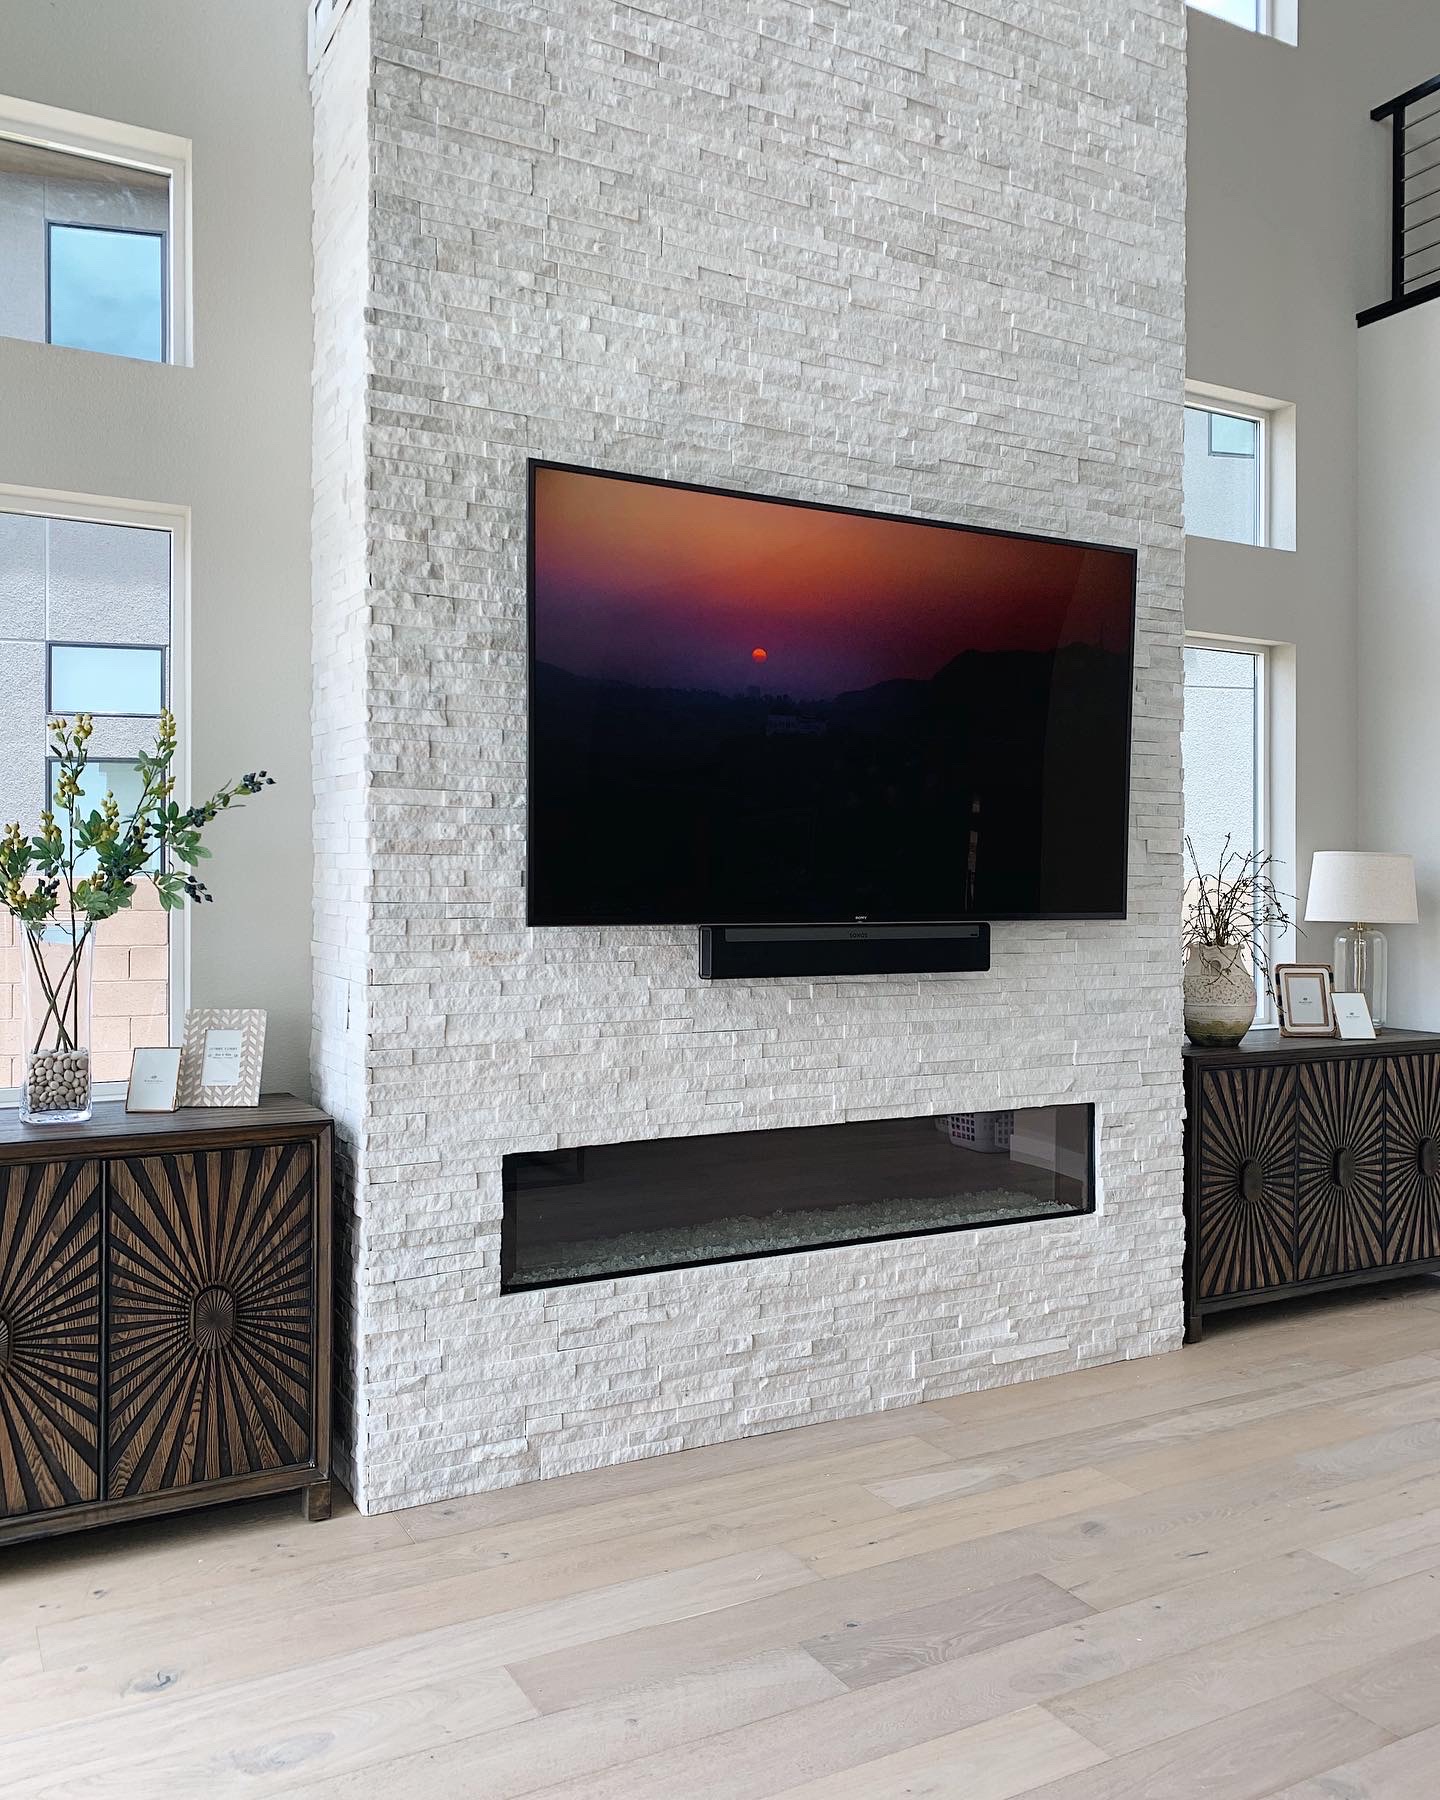 Enhance Your Movie Watching Experience with a New Home Theater System